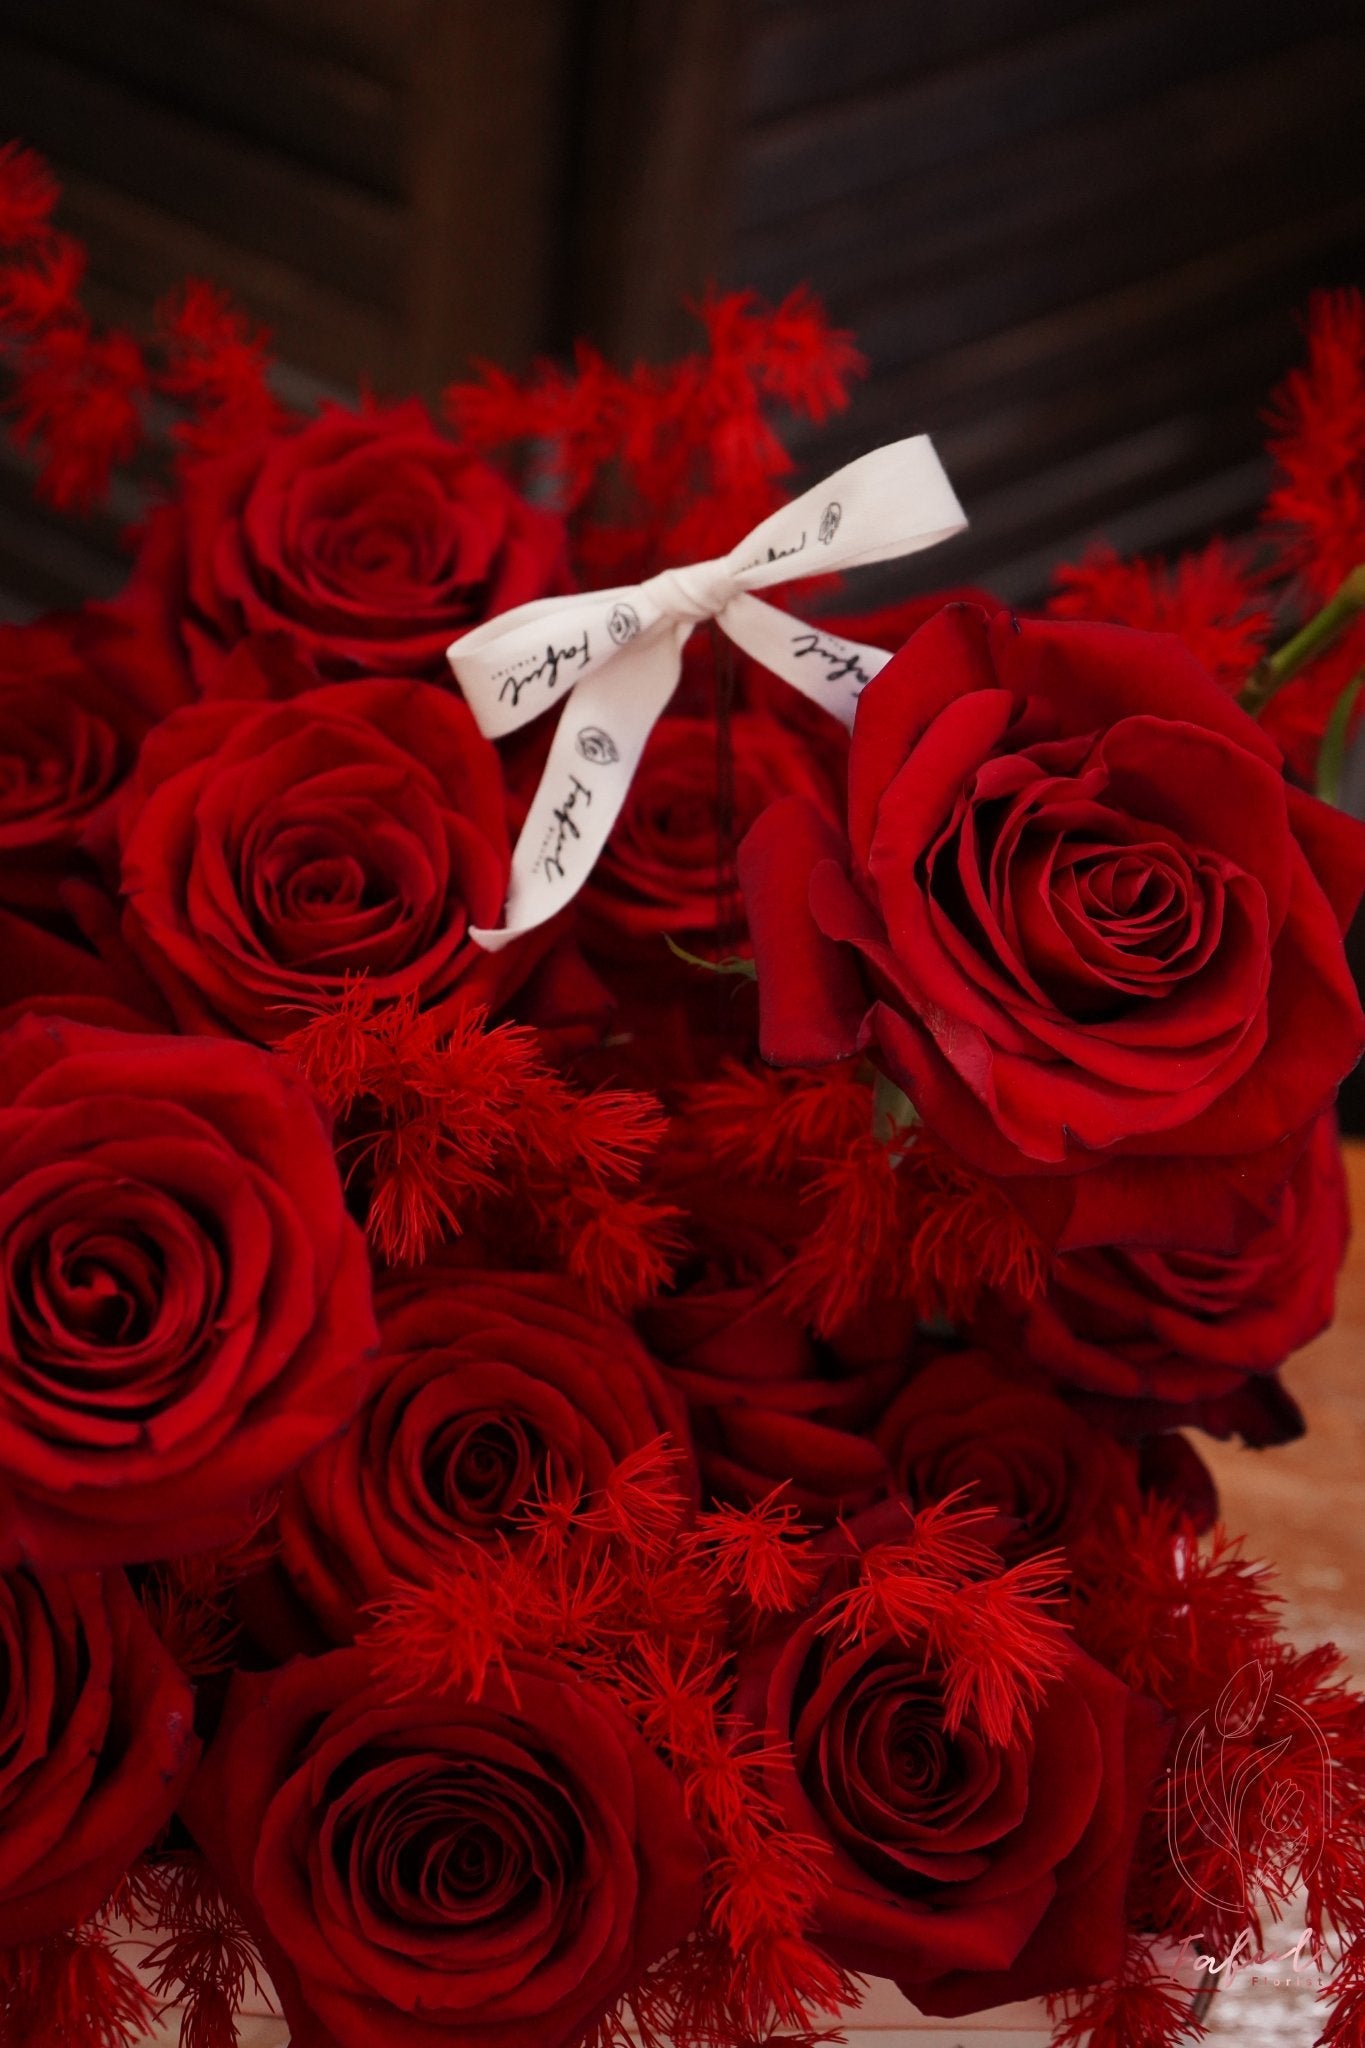 Red Romance | Red Rose - Fresh flowers, Roses- Red Romance -Feather - Anniversary - Romance - Rose - 4